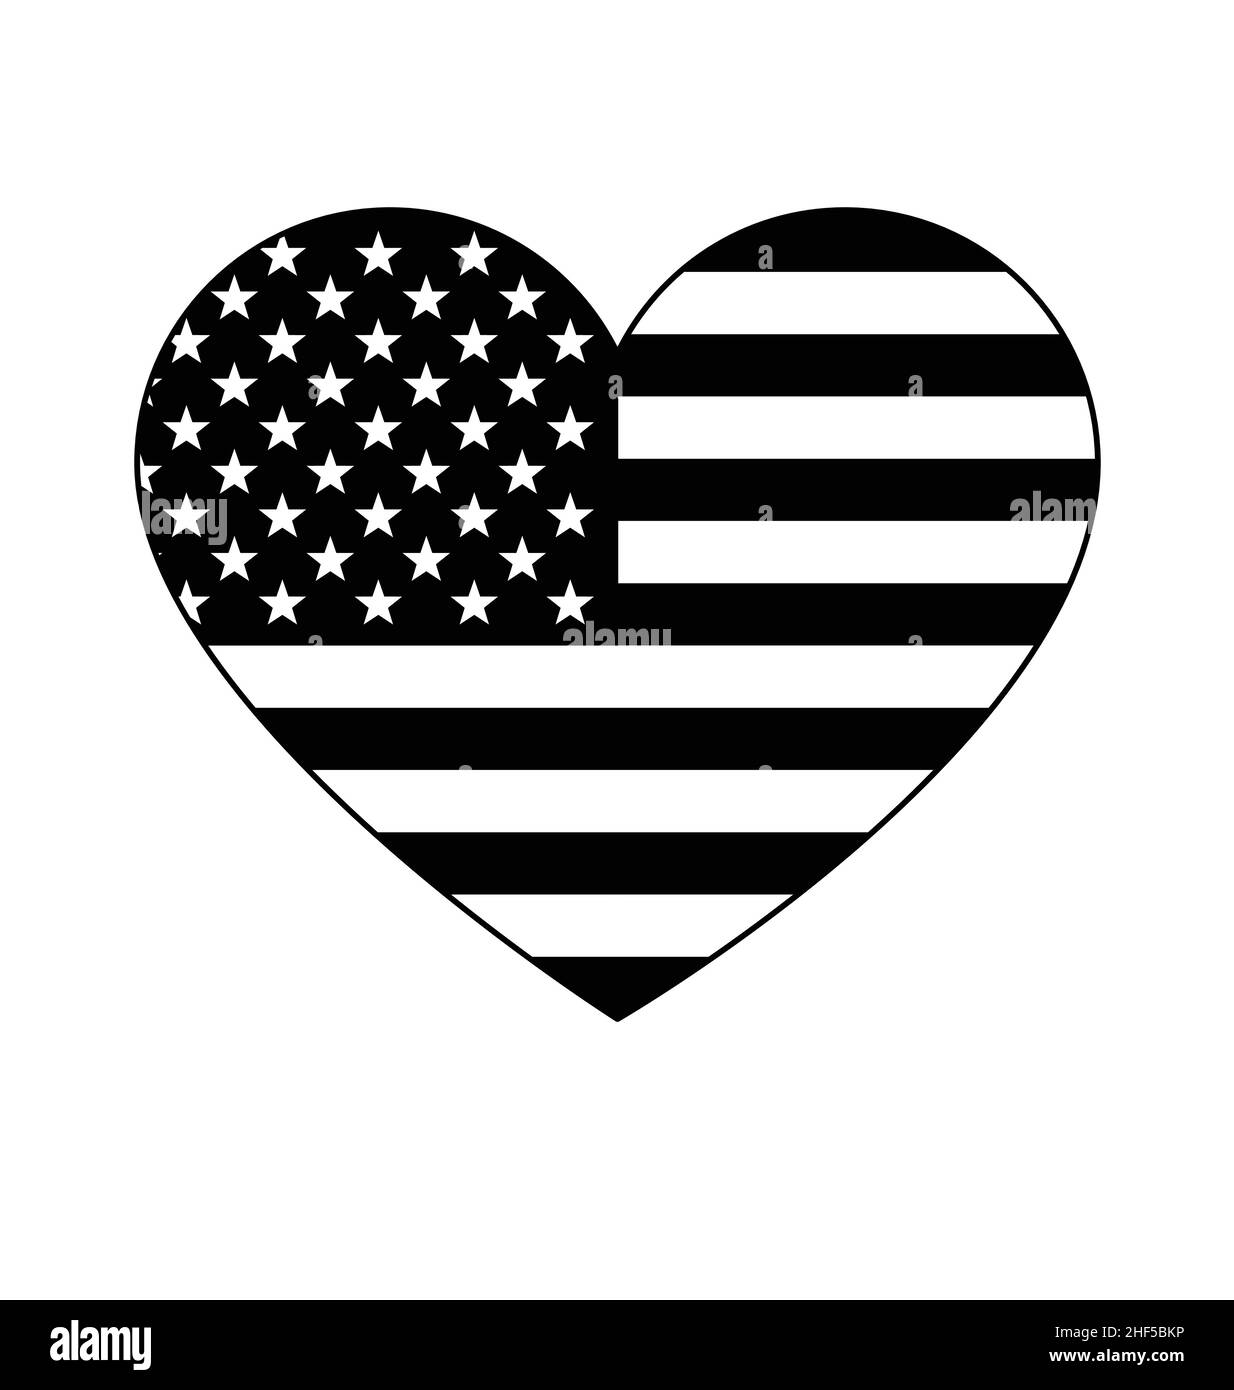 american usa flag in love heart shape icon symbol black and white tshirt graphic isolated on white background vector Stock Vector